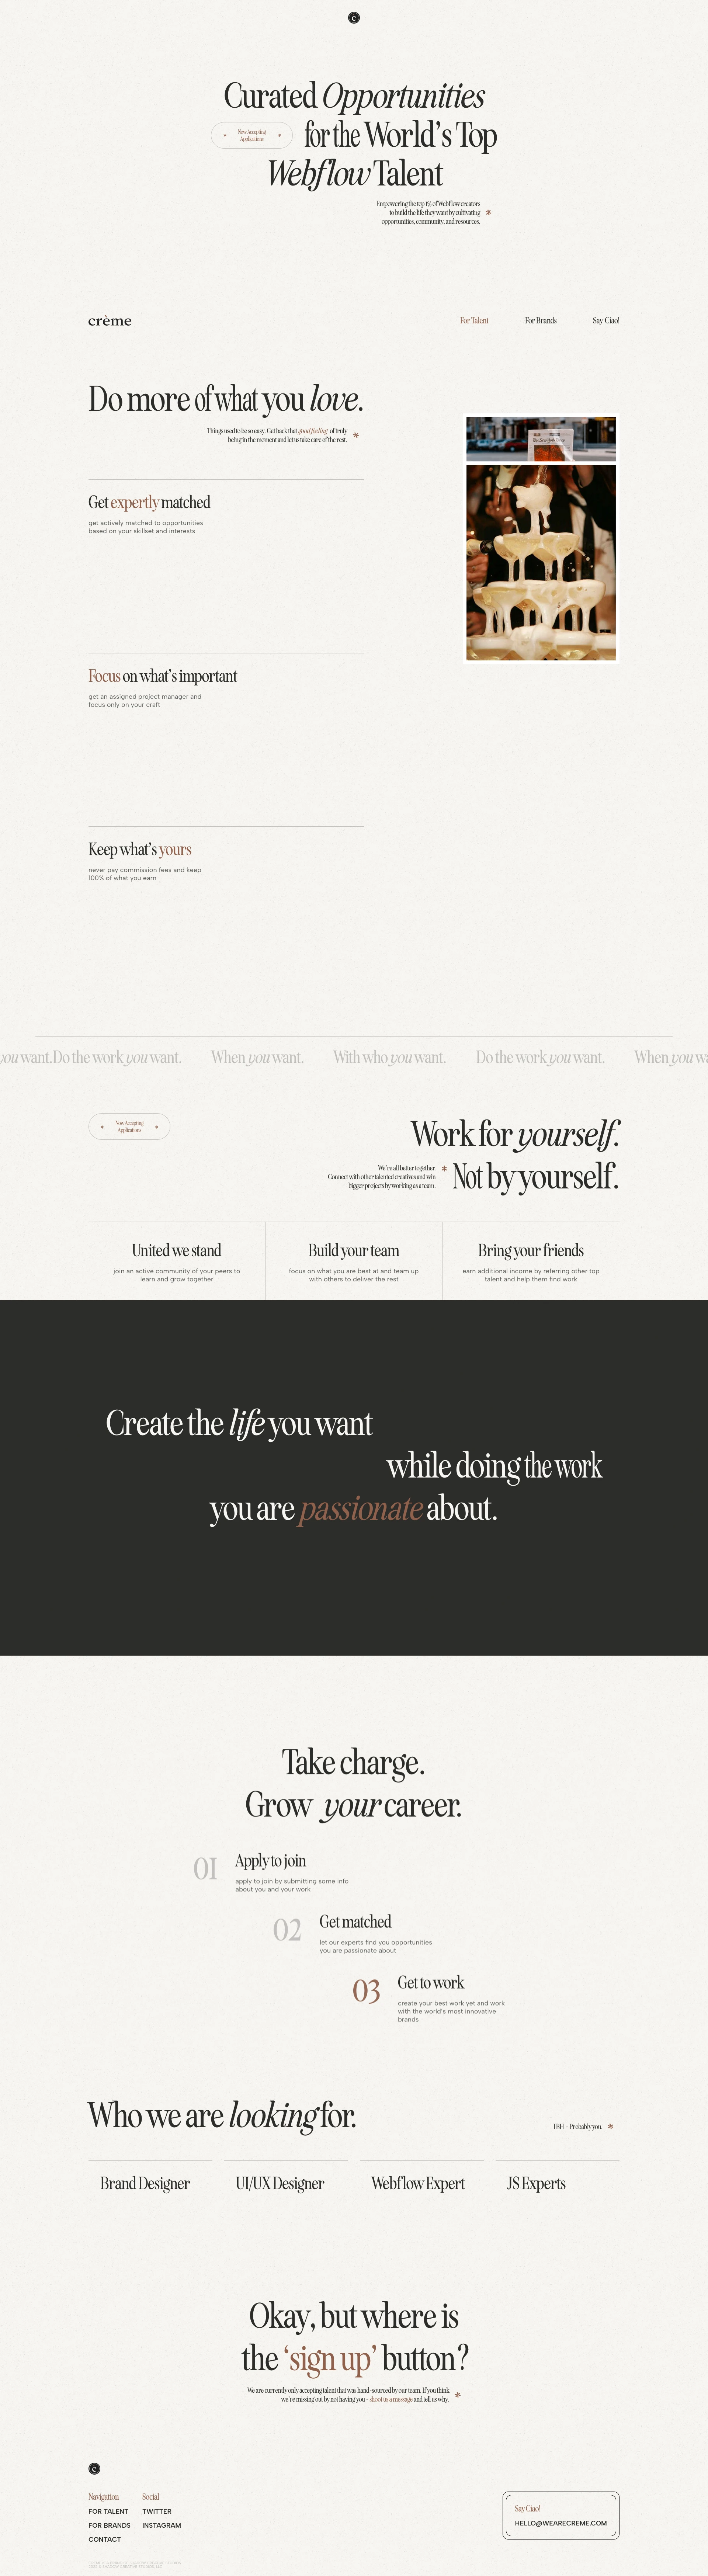 Crème Landing Page Example: Empowering the top 1% of Webflow creators to build the life they want by cultivating opportunities, community, and resources.